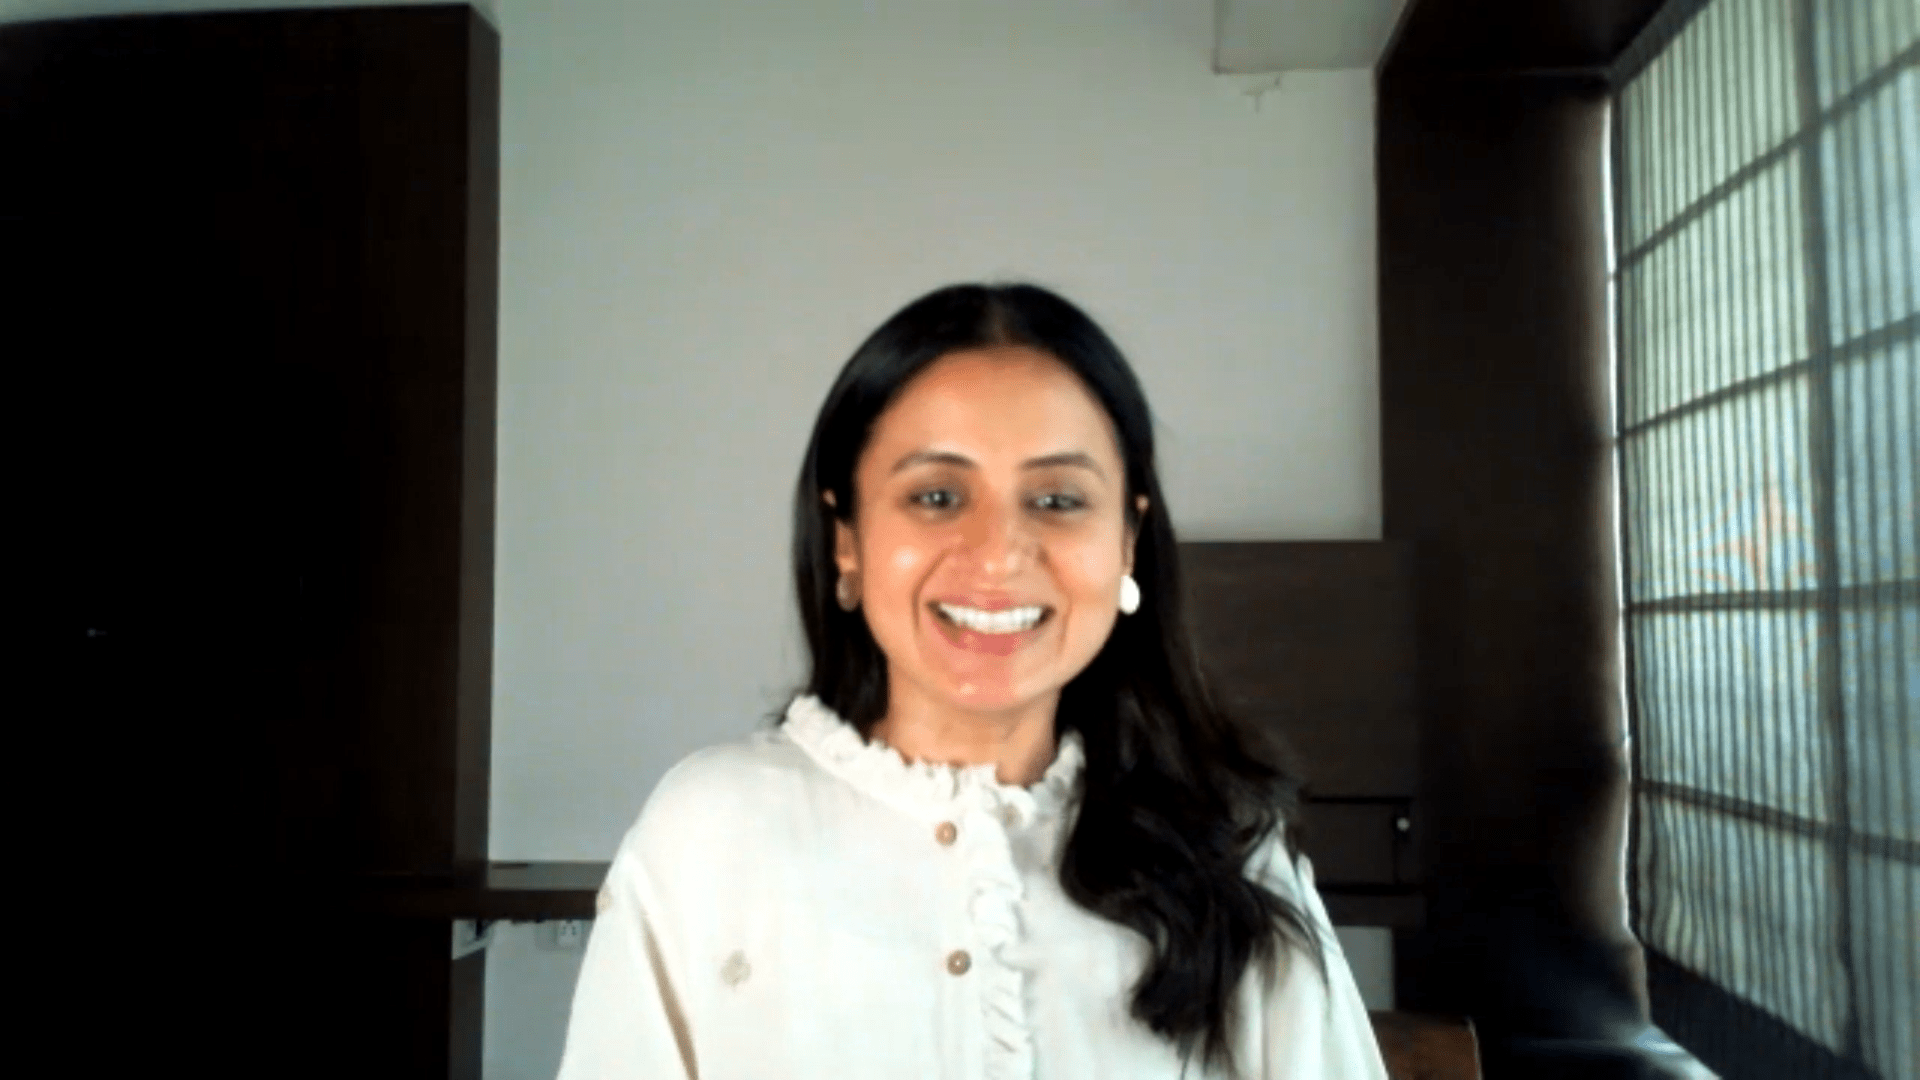 Rasika Dugal, actor, talks about the shift that the entertainment industry has made to OTT platforms.